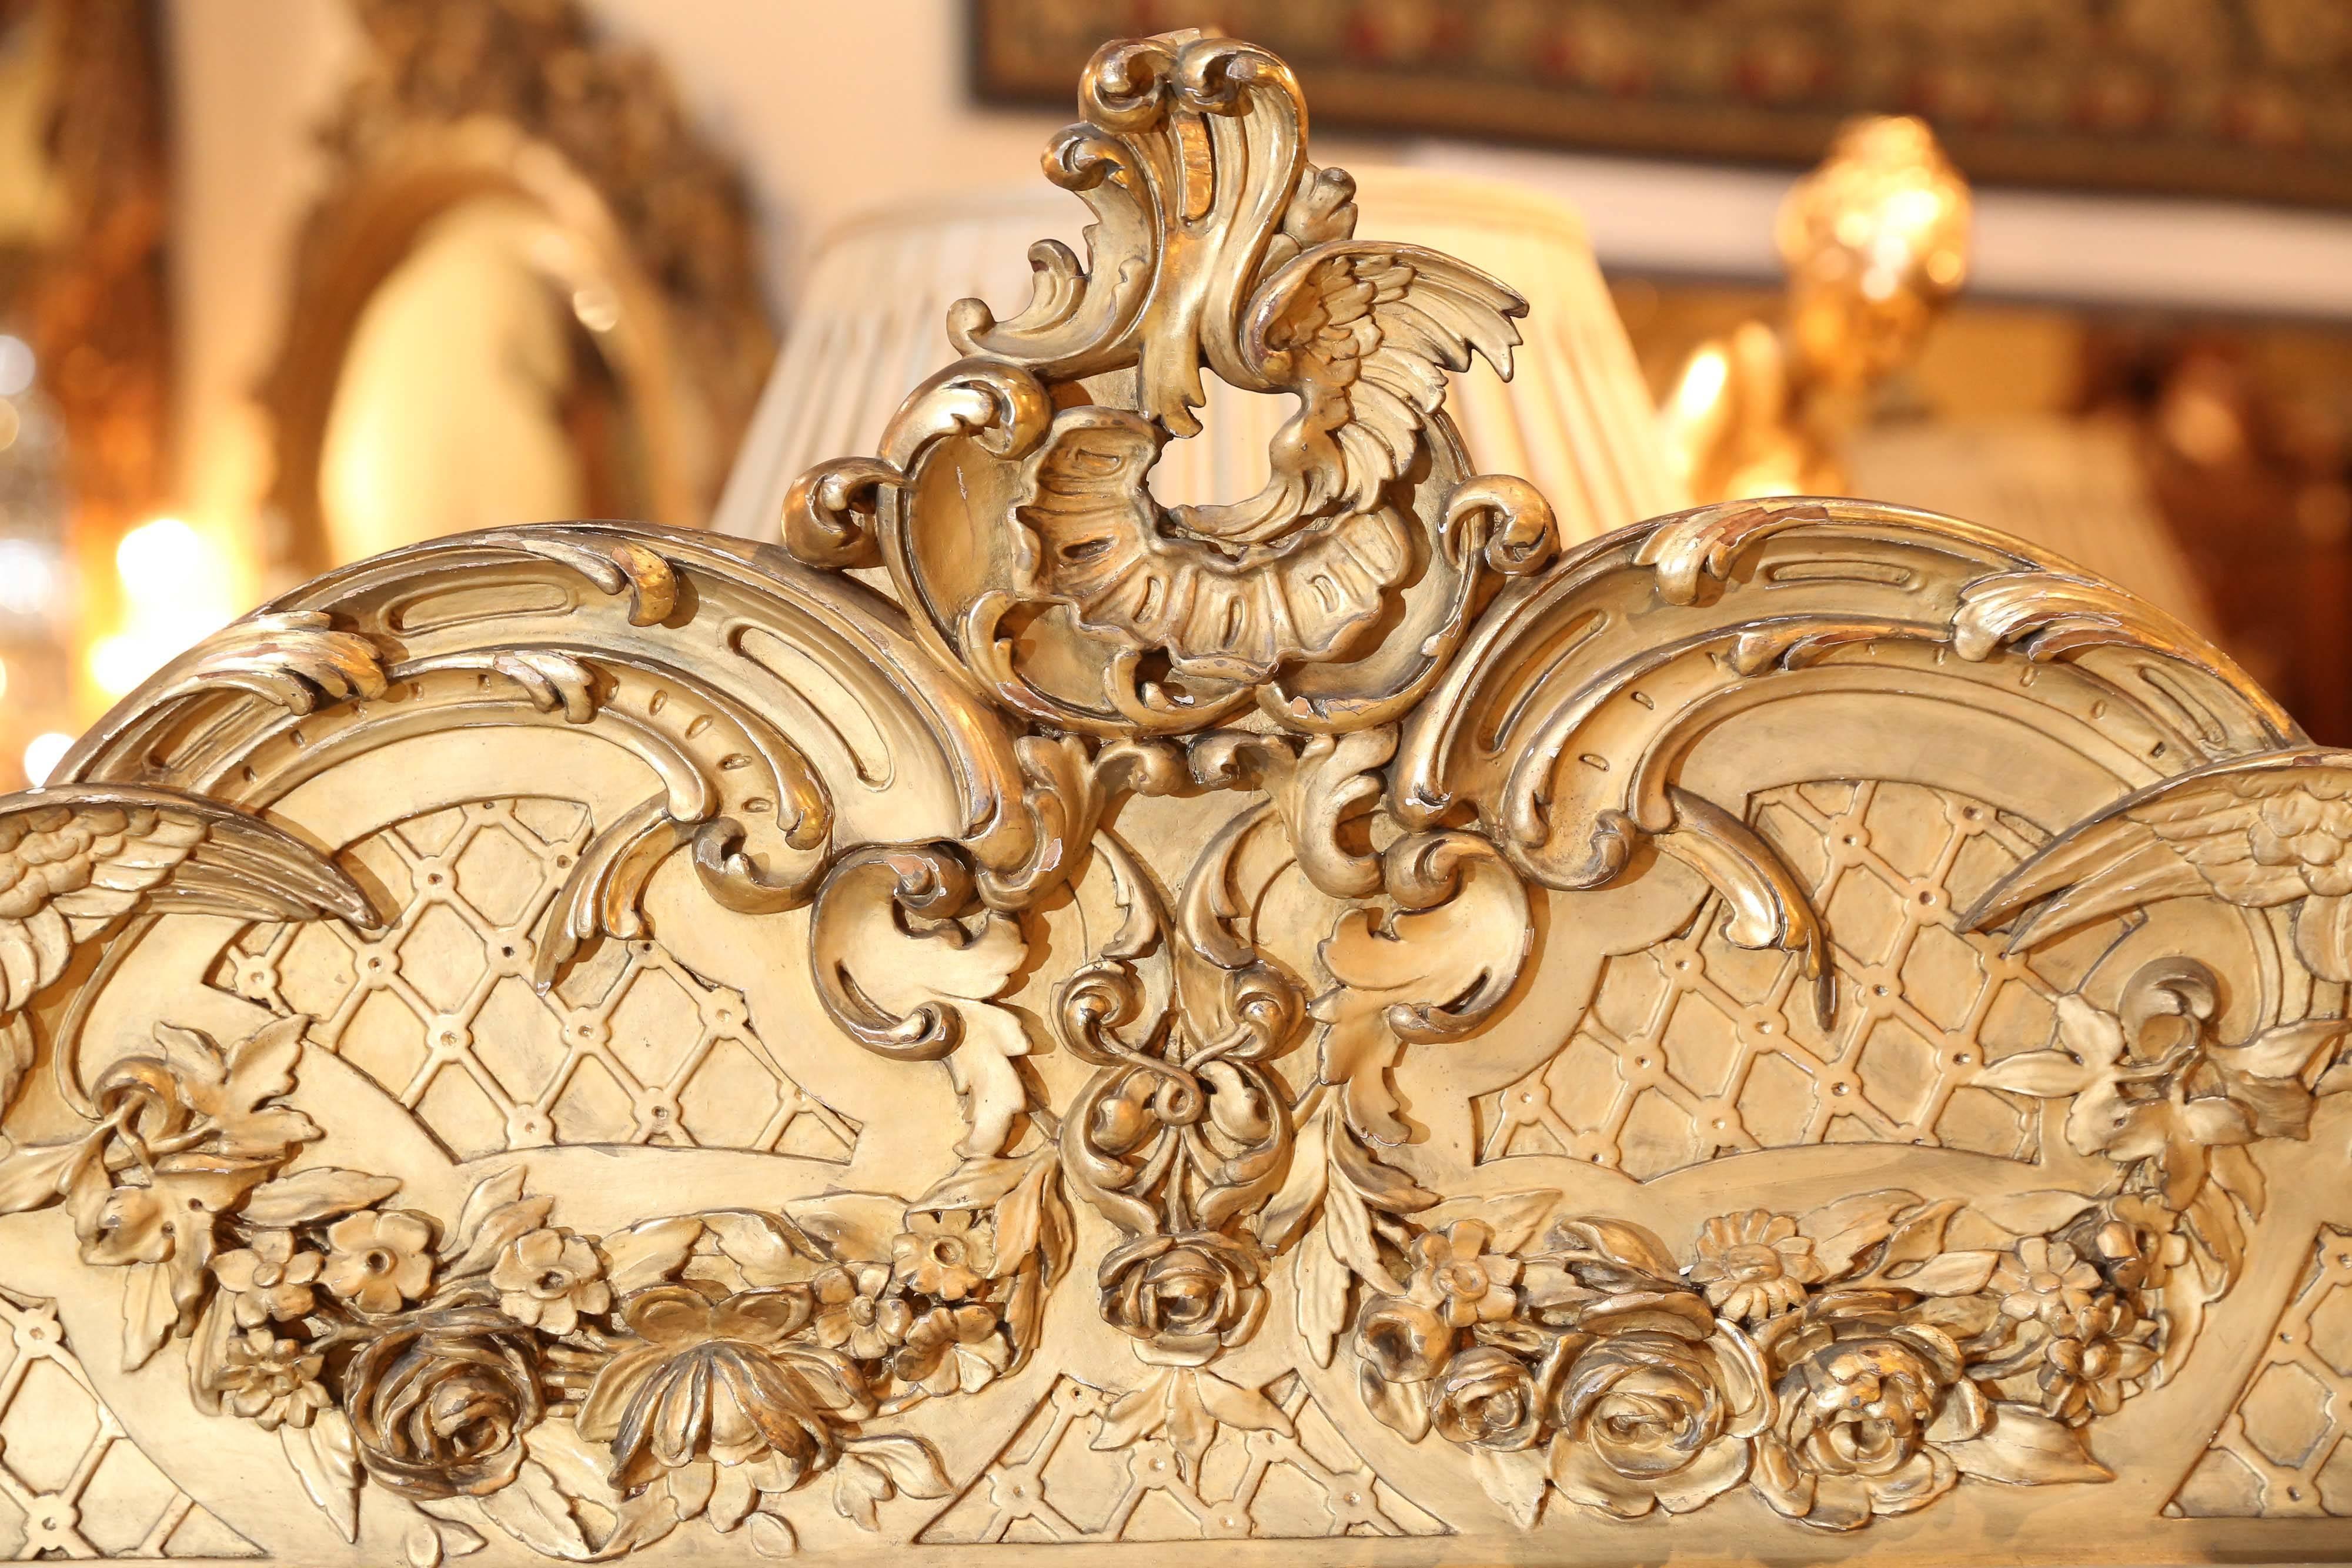 French Louis XV style vitrine with beautiful giltwood , carved with angels
and a cartouche at the crest, alabaster in cream color on the top. It has a
beautifully shaped front and lovely carved and curved legs. It has a mirror
inside back and on the